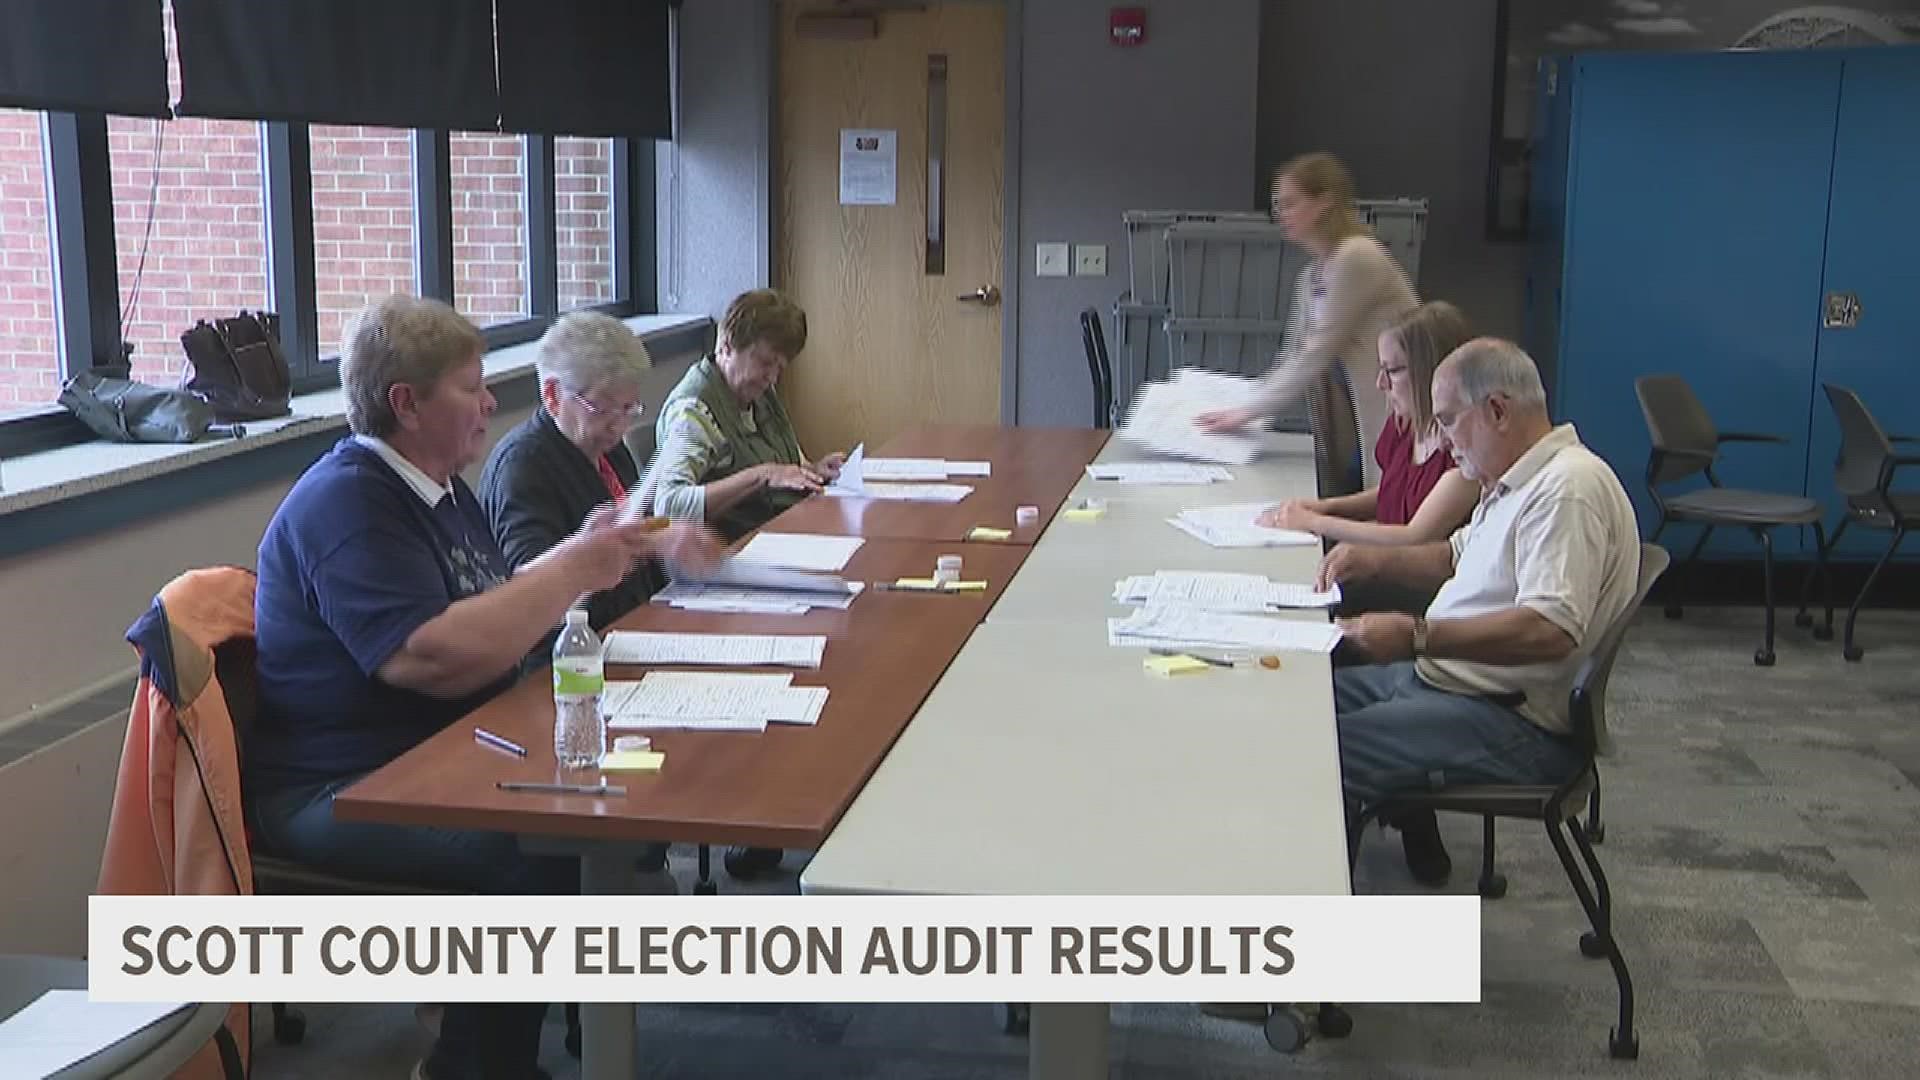 Every county is subject to an audit of a random precinct's ballots, but this year, two races are being double-checked, instead of just one.